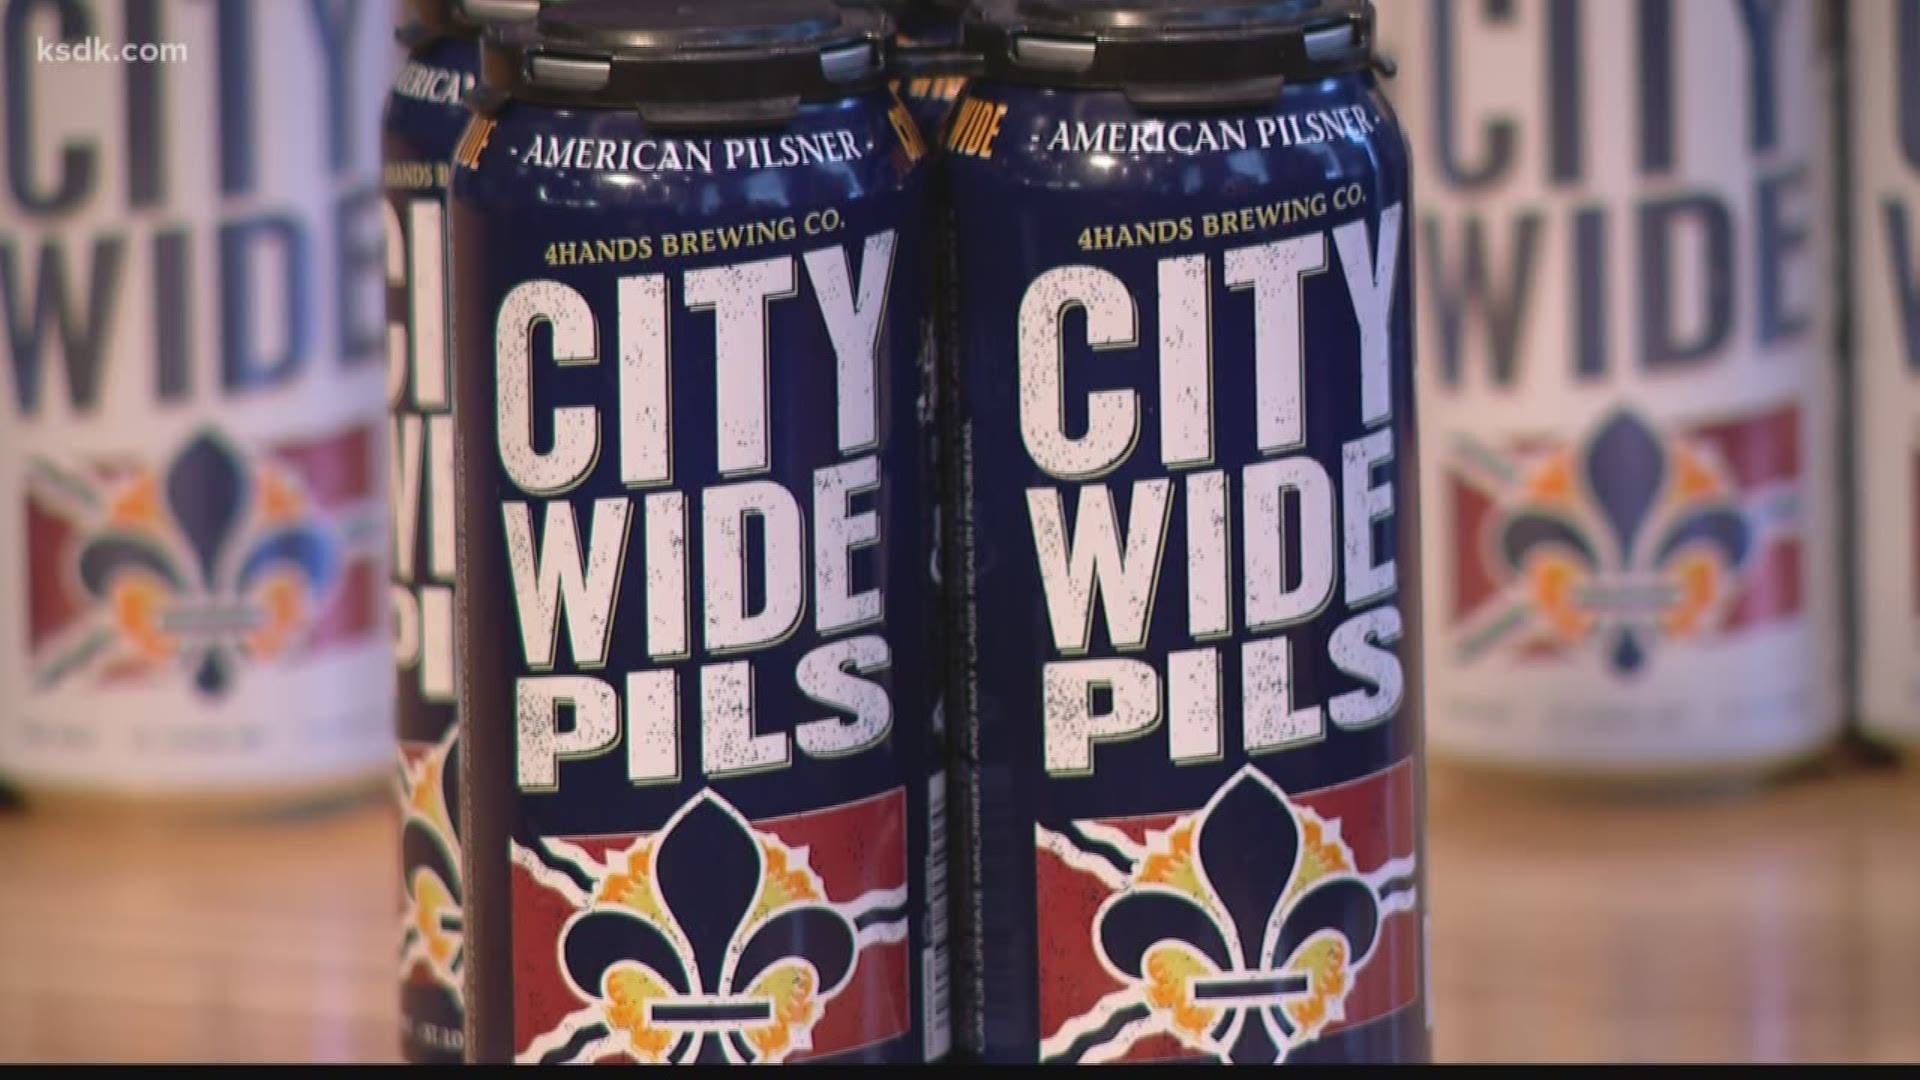 Each can sold translates into dollars for St. Louis area charities.